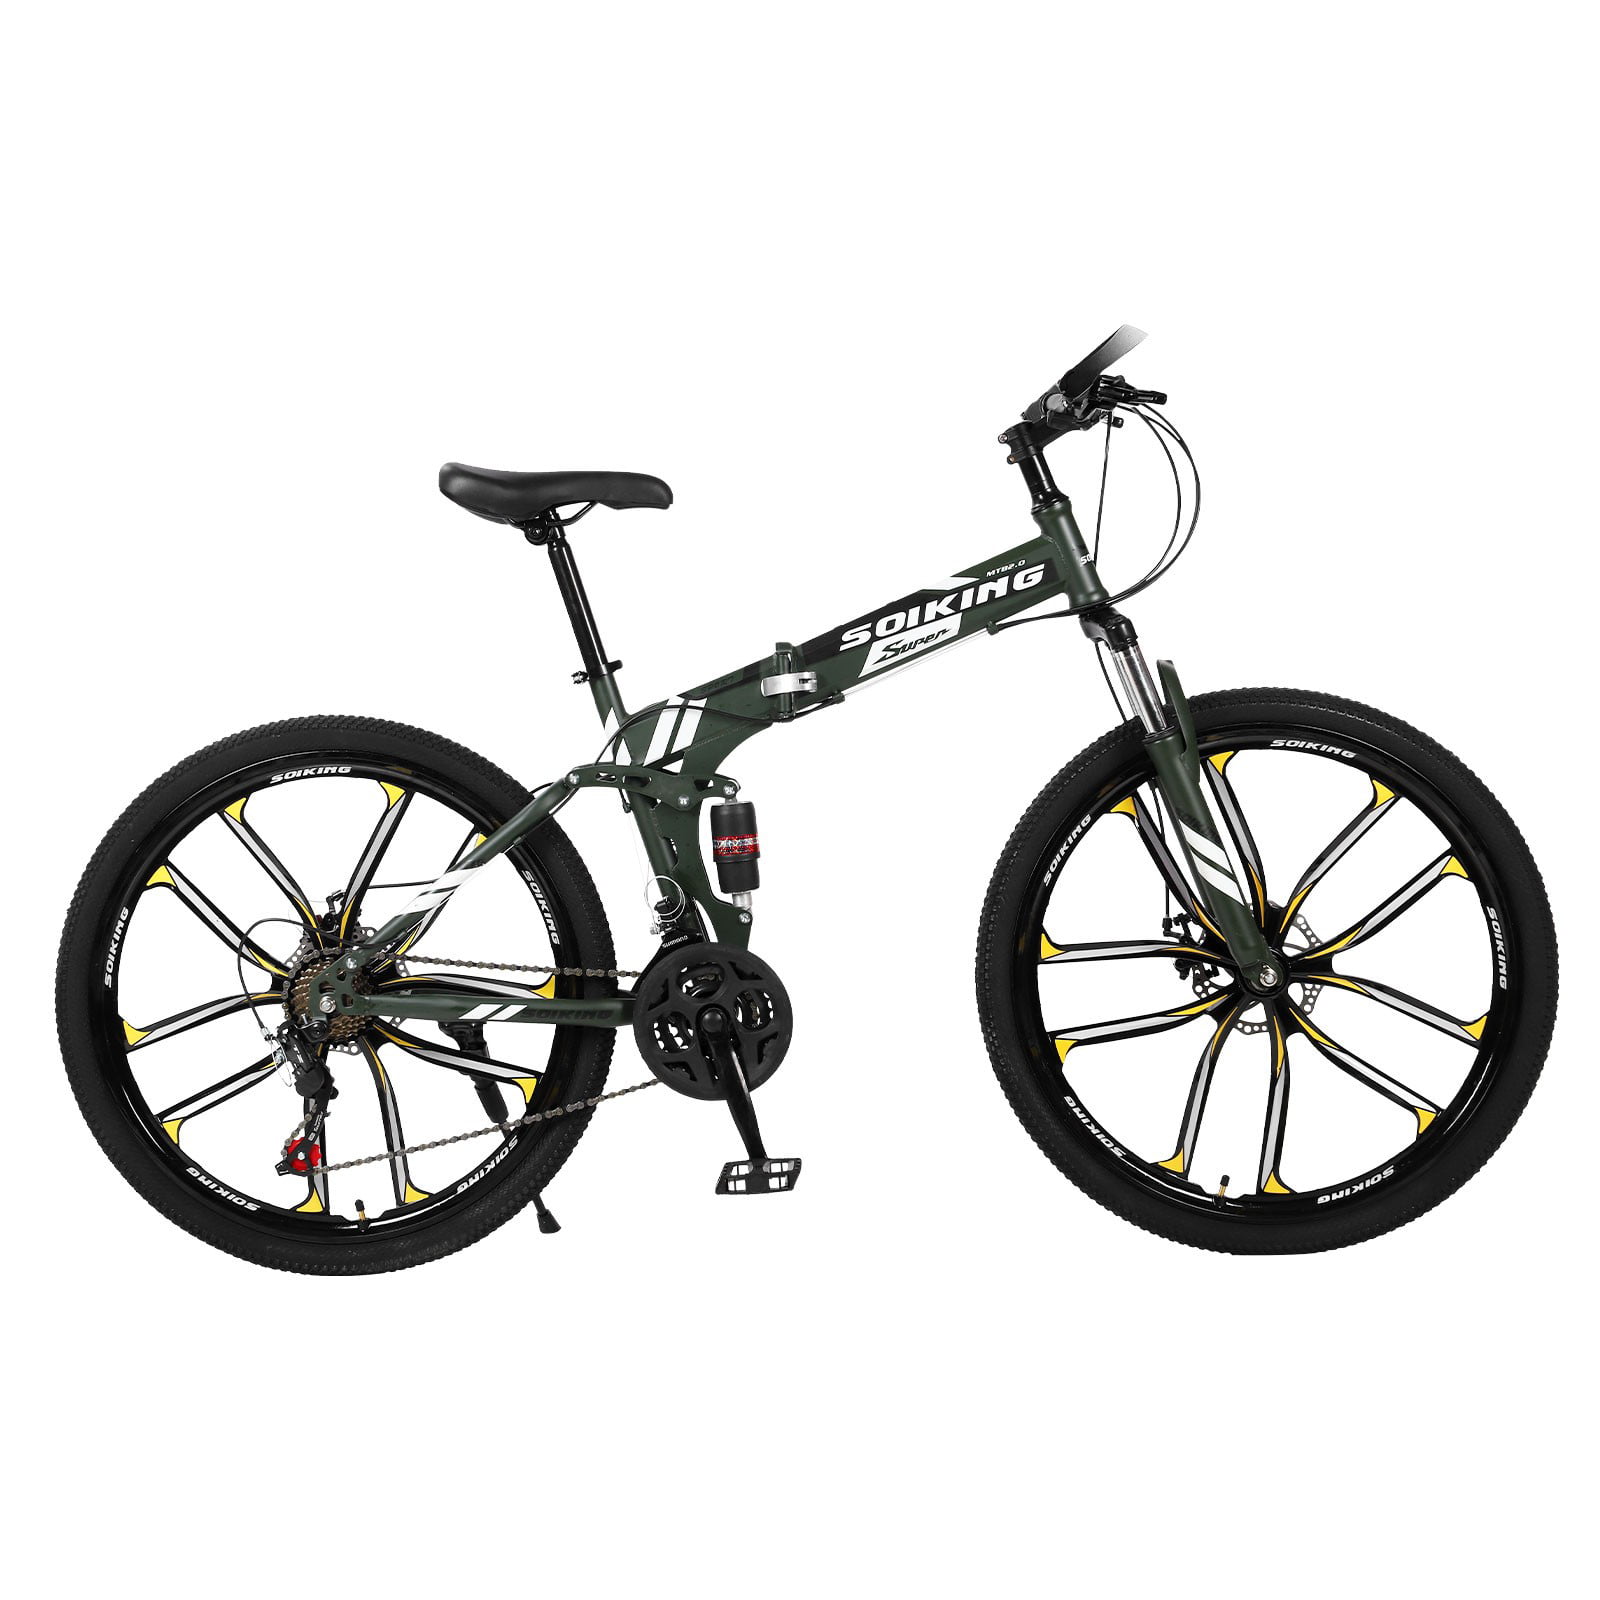 26 Inch Variable Speed Bicycle Travel Folding Bicycle Mountain Bike for Adults,Full Suspension Bicycle Outdoor Racing Cycling